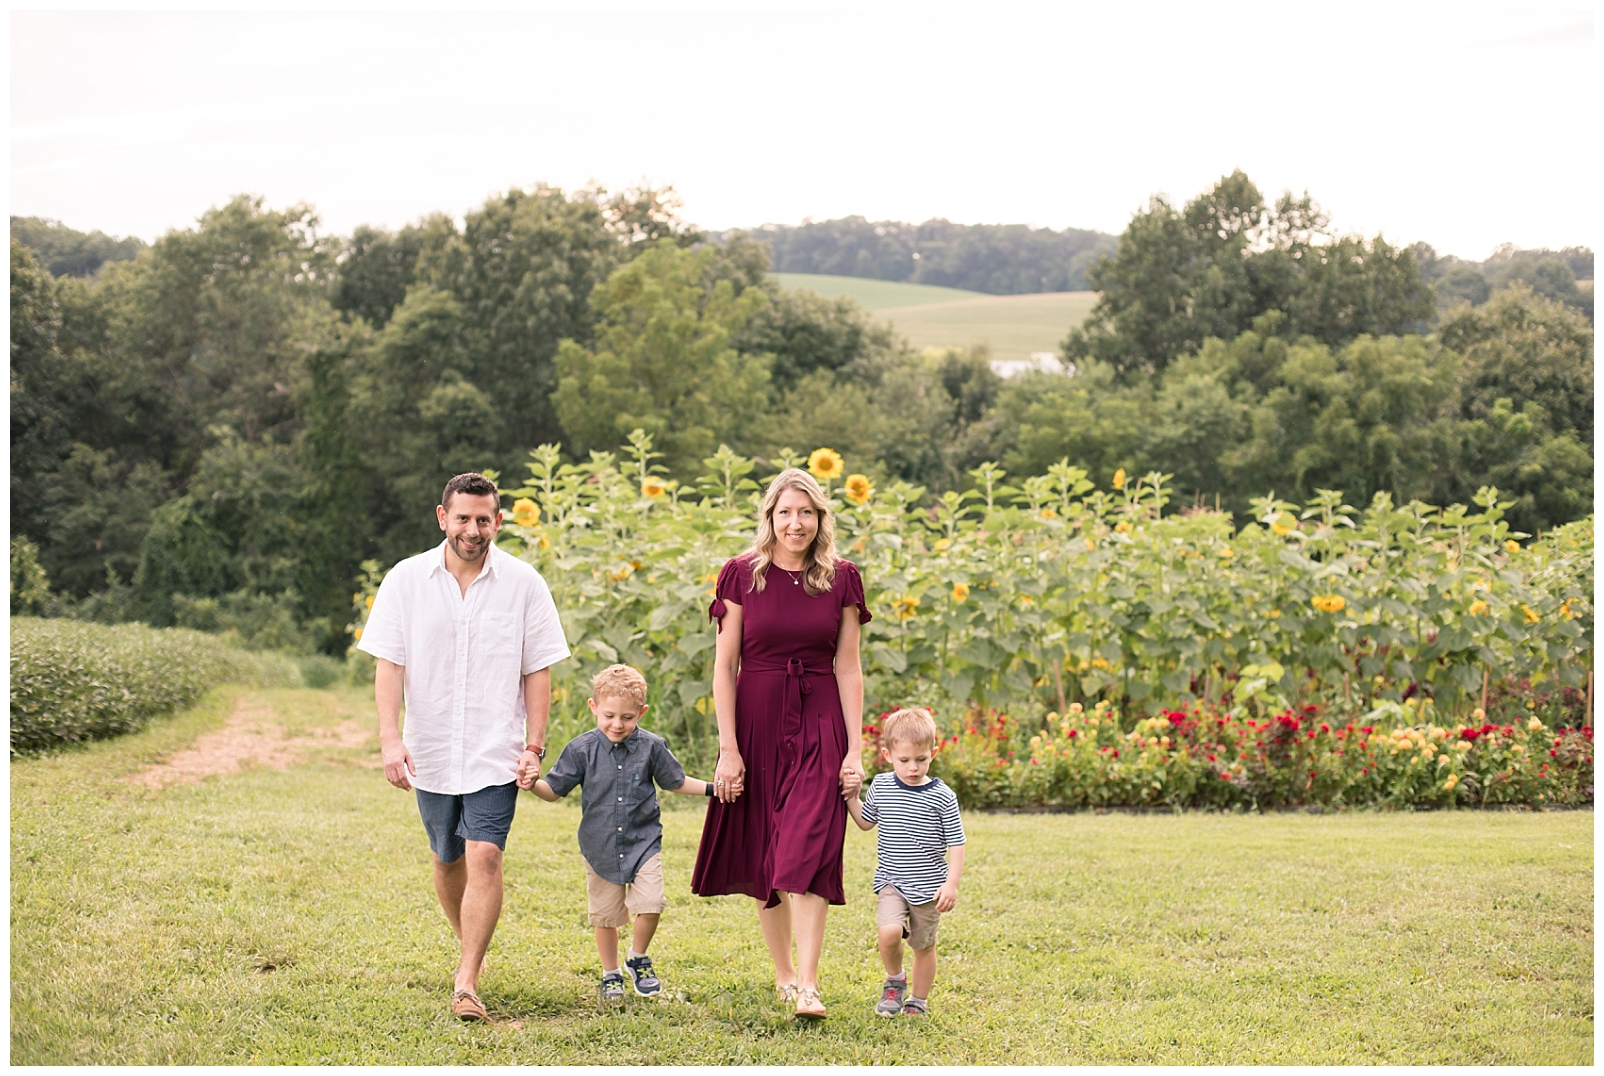 family of 4 walking through a sunflower field